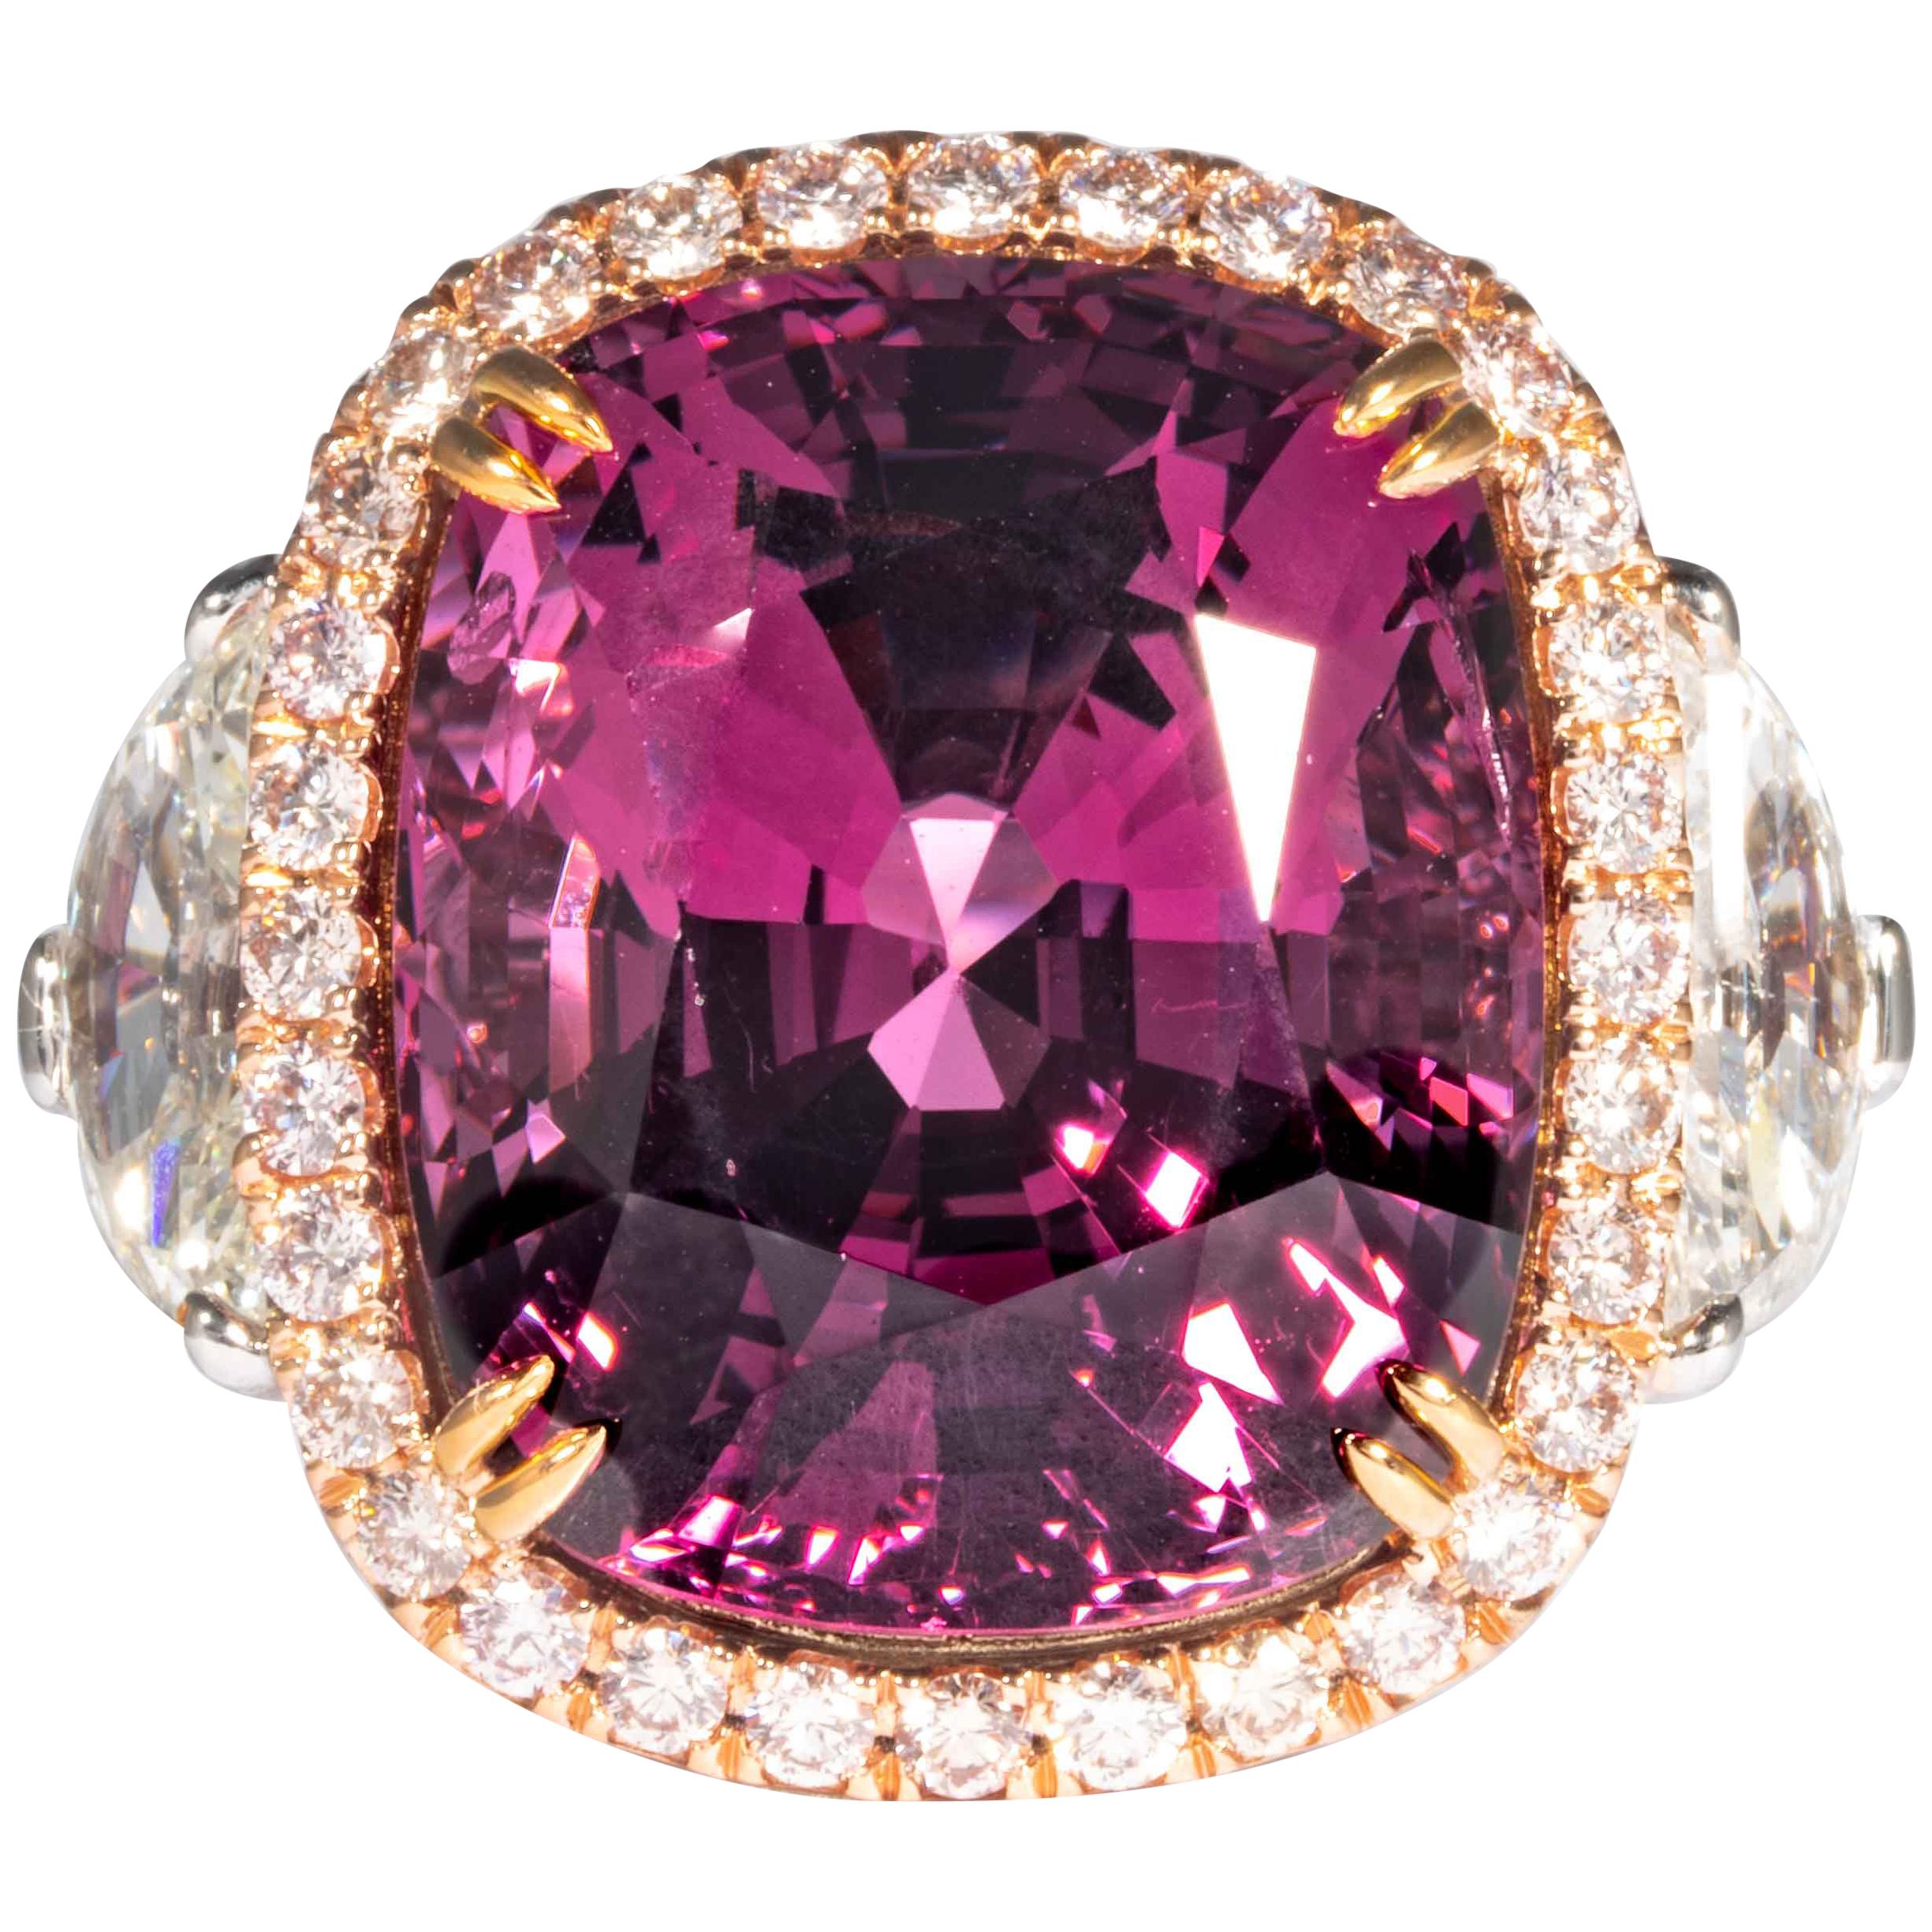 Shreve, Crump & Low 15.38 Carat Burmese Pink Spinel and Diamond Ring 'Dungaire'